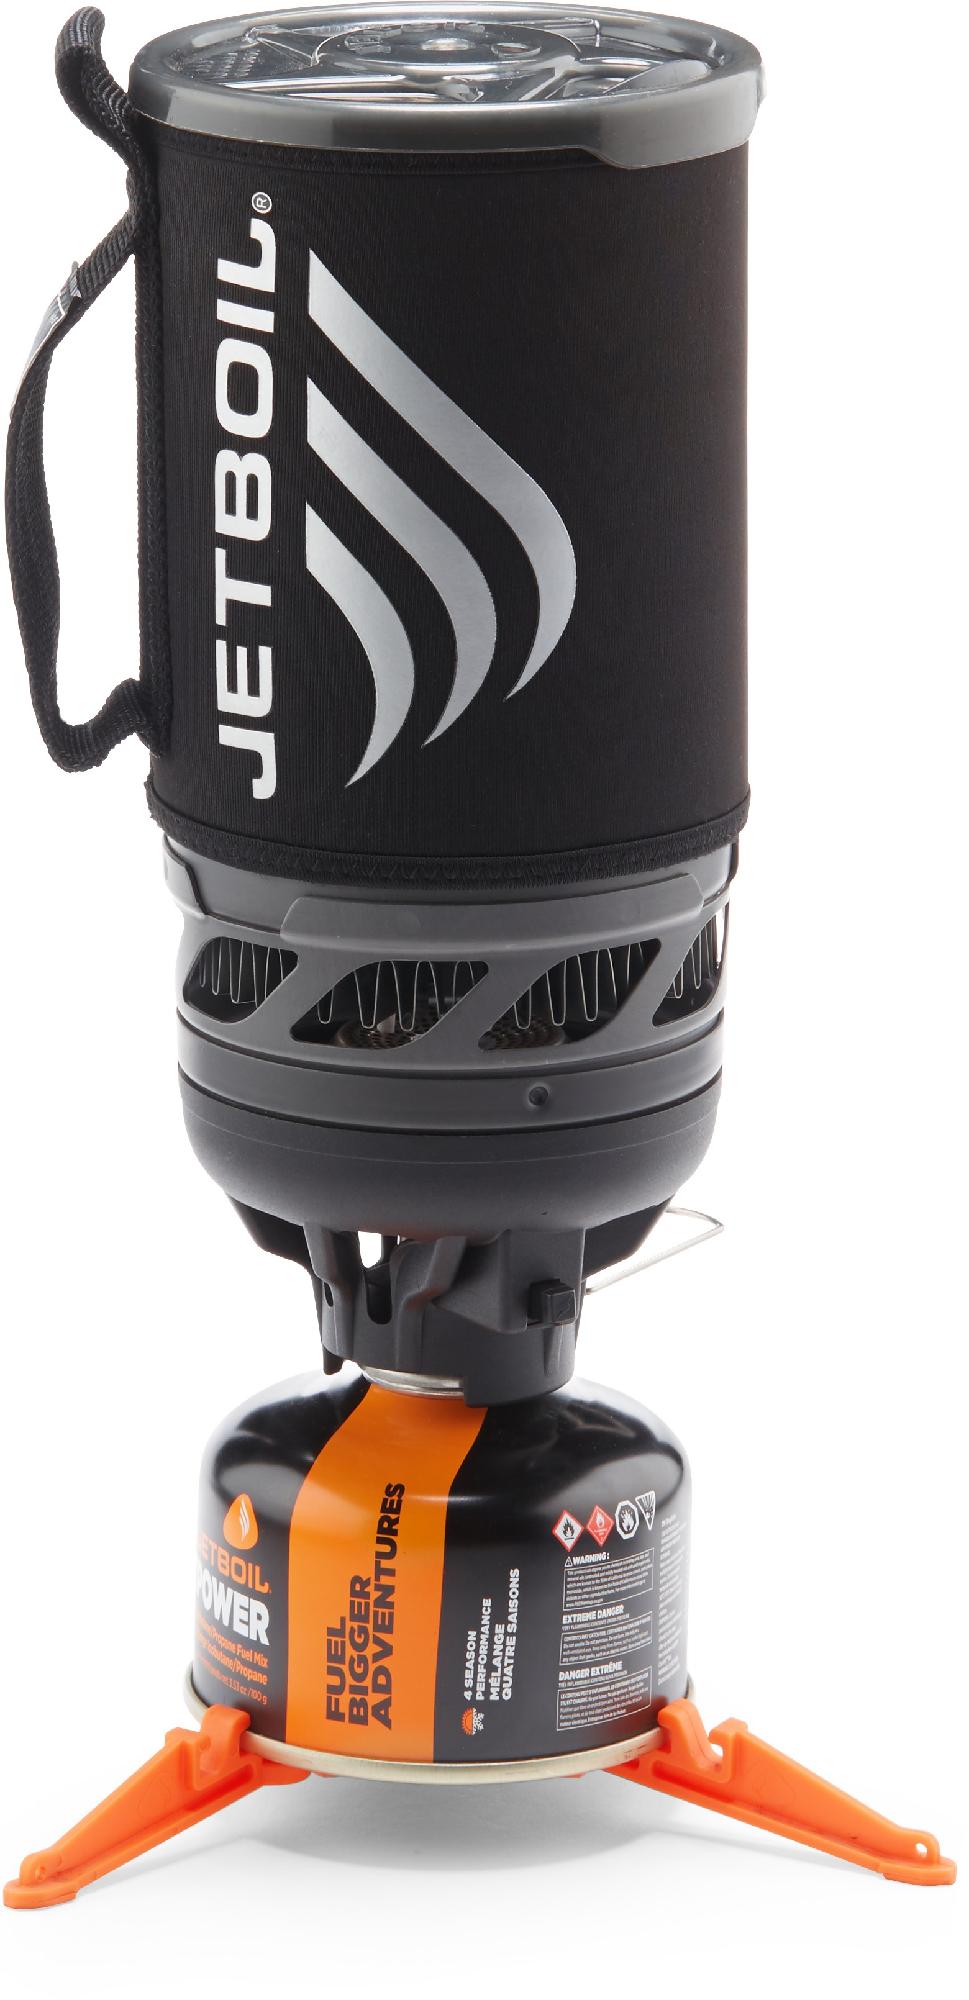 Jetboil Flash Camping Stove Cooking System